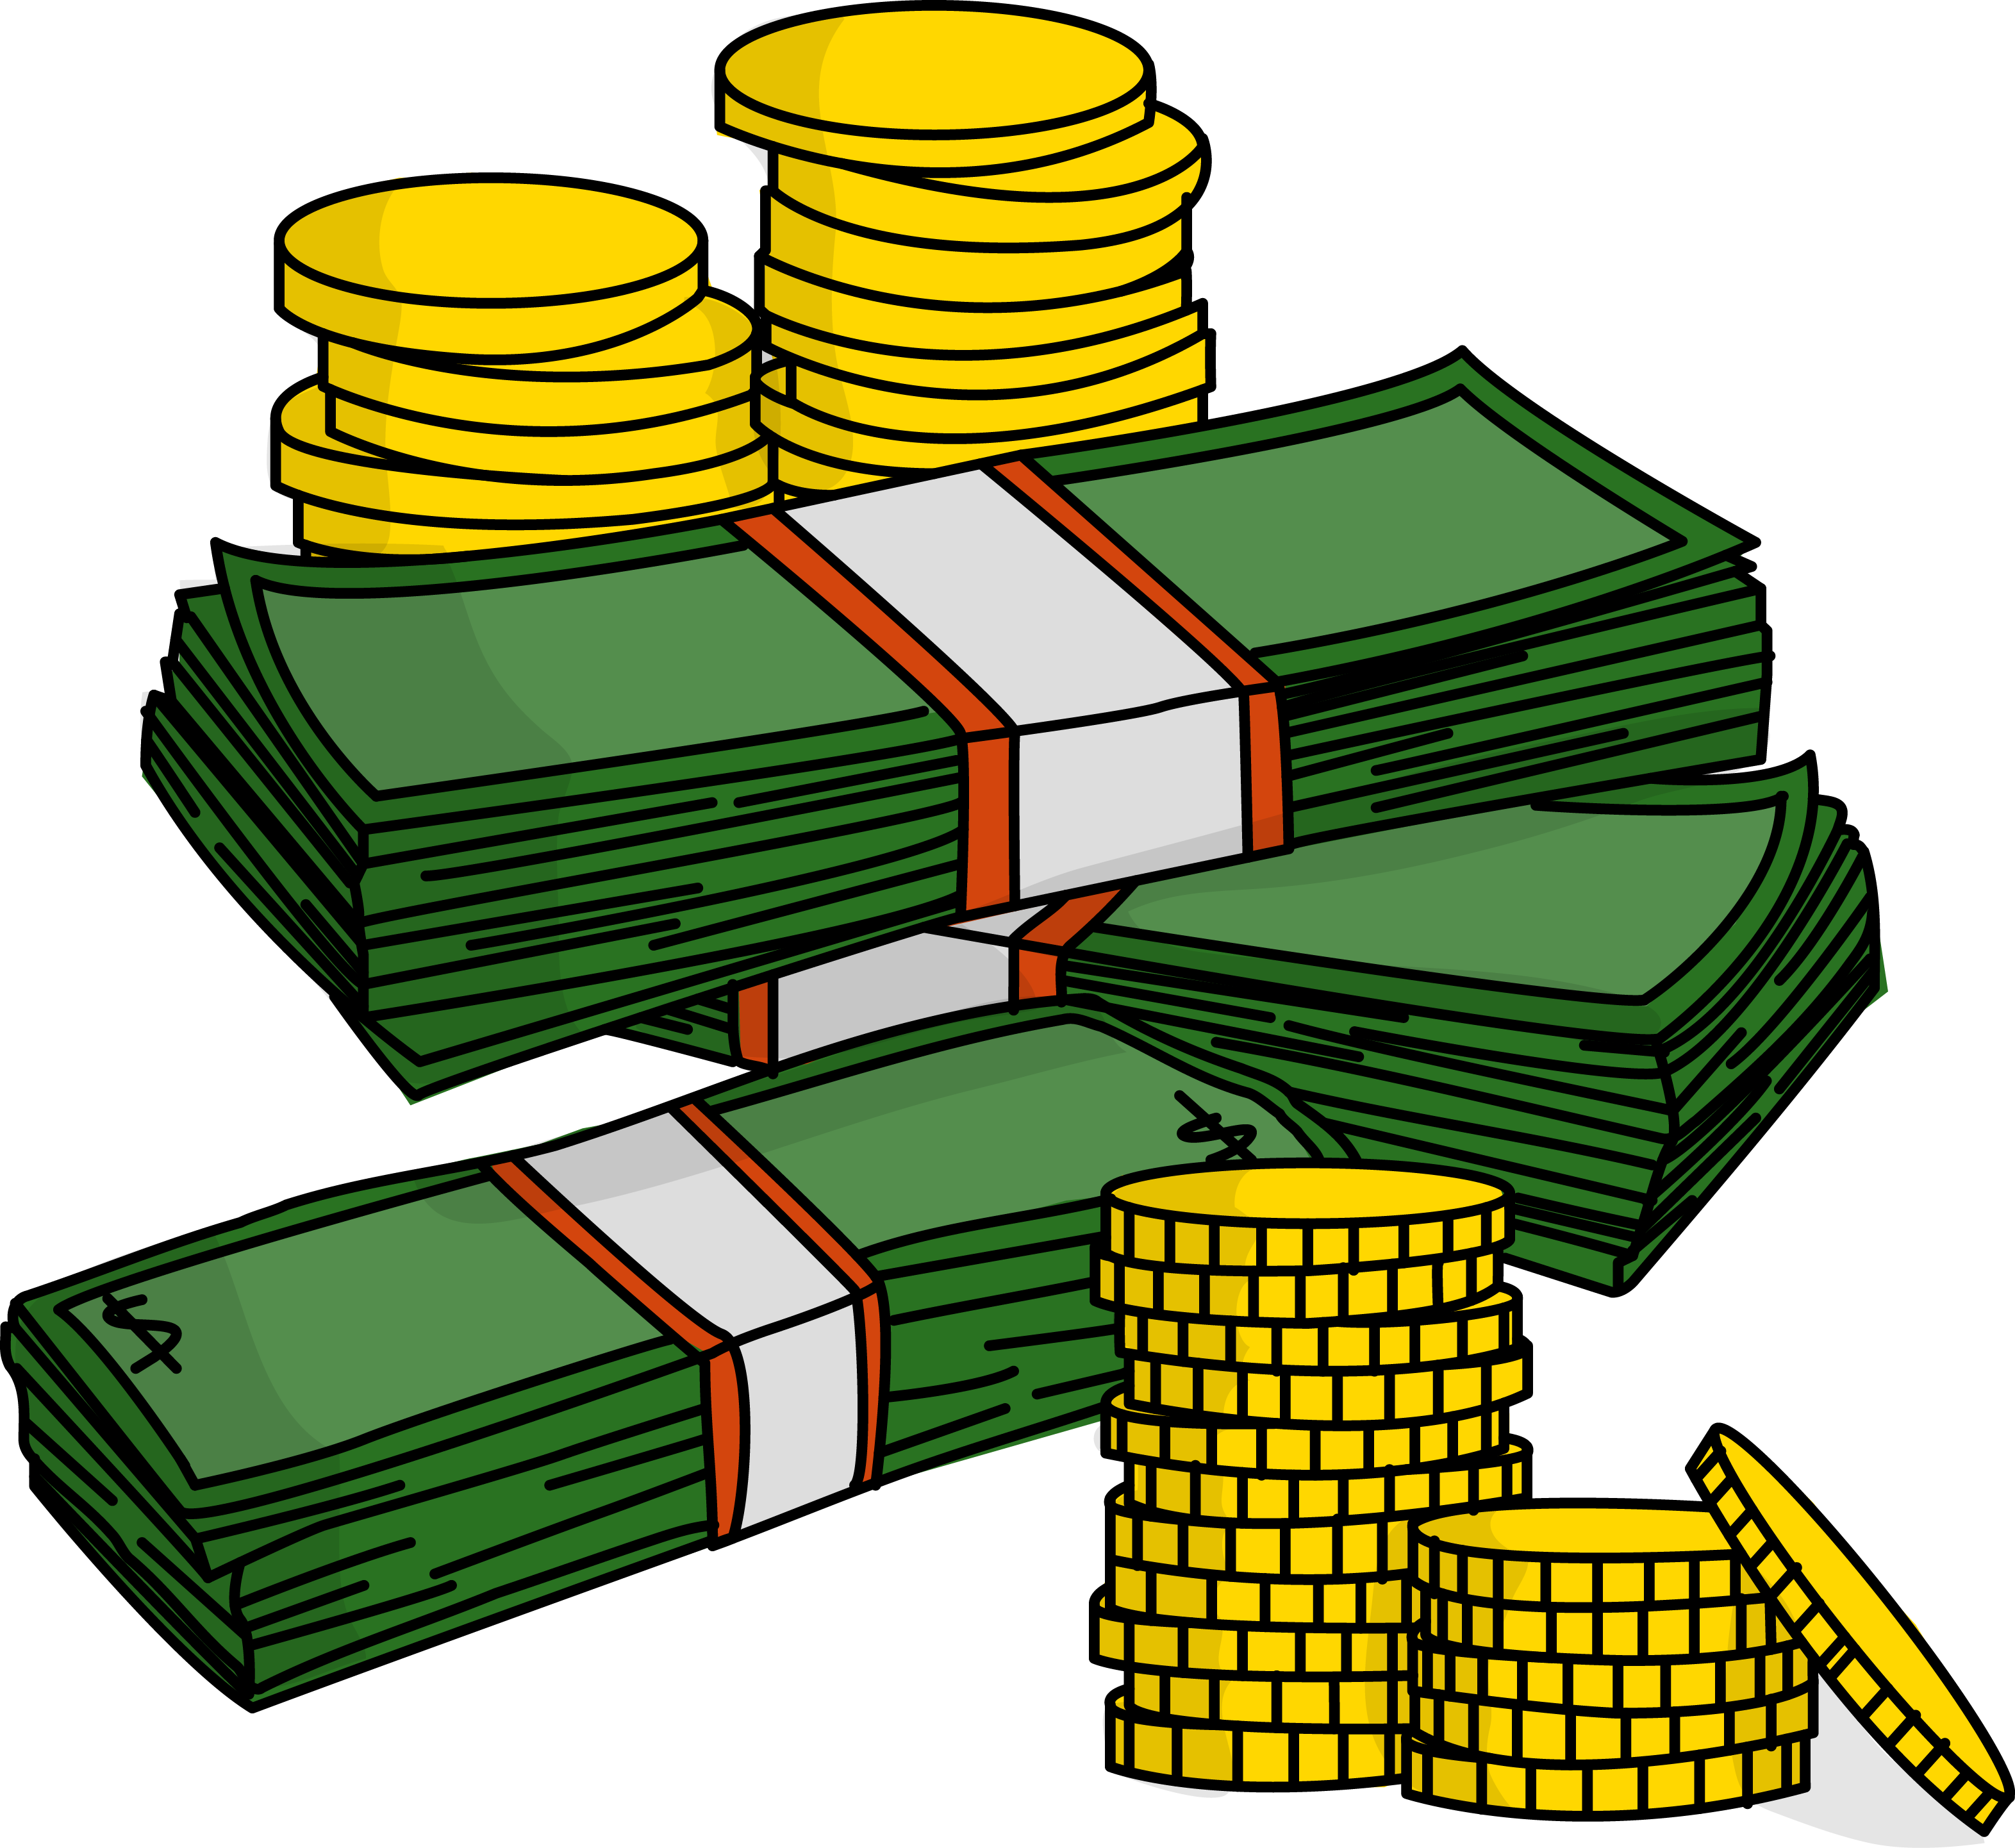 Free Stacks Of Money With Coins High Resolution Clip Art | All .